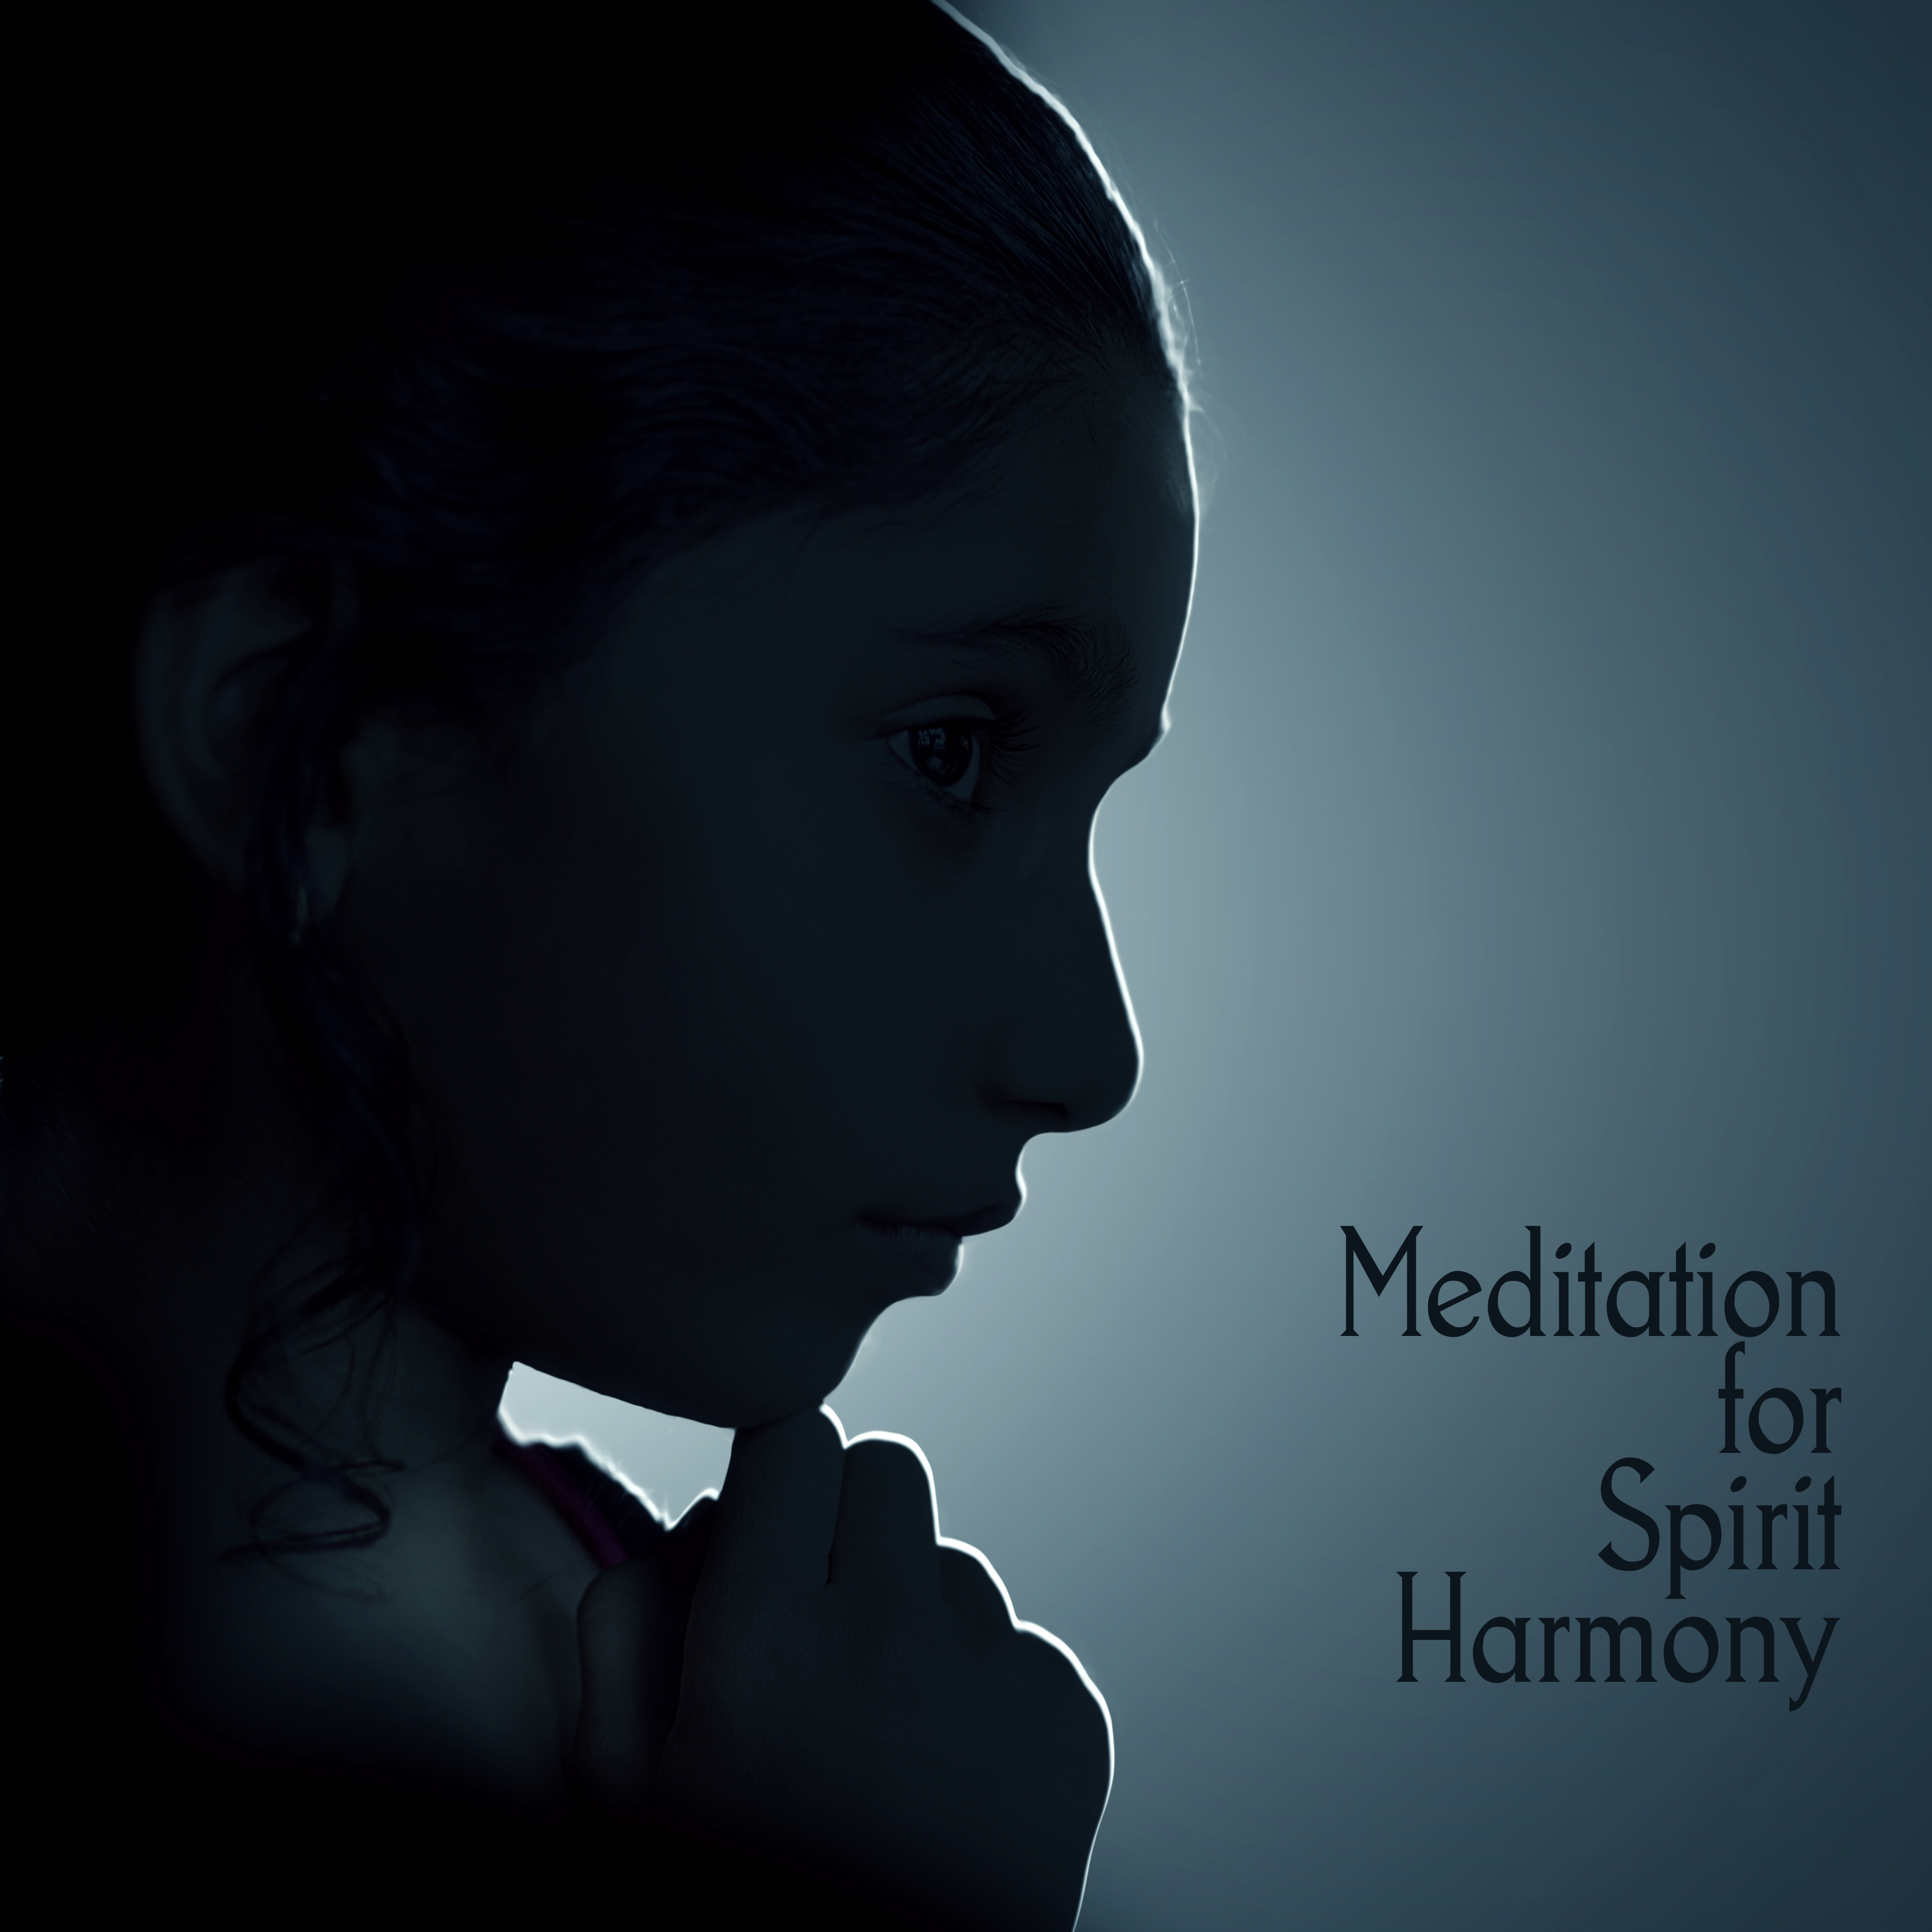 Meditation for Spirit Harmony – Relaxing Music for Yoga, Meditation, Relaxation, Calm Down, Healing Melodies to Rest